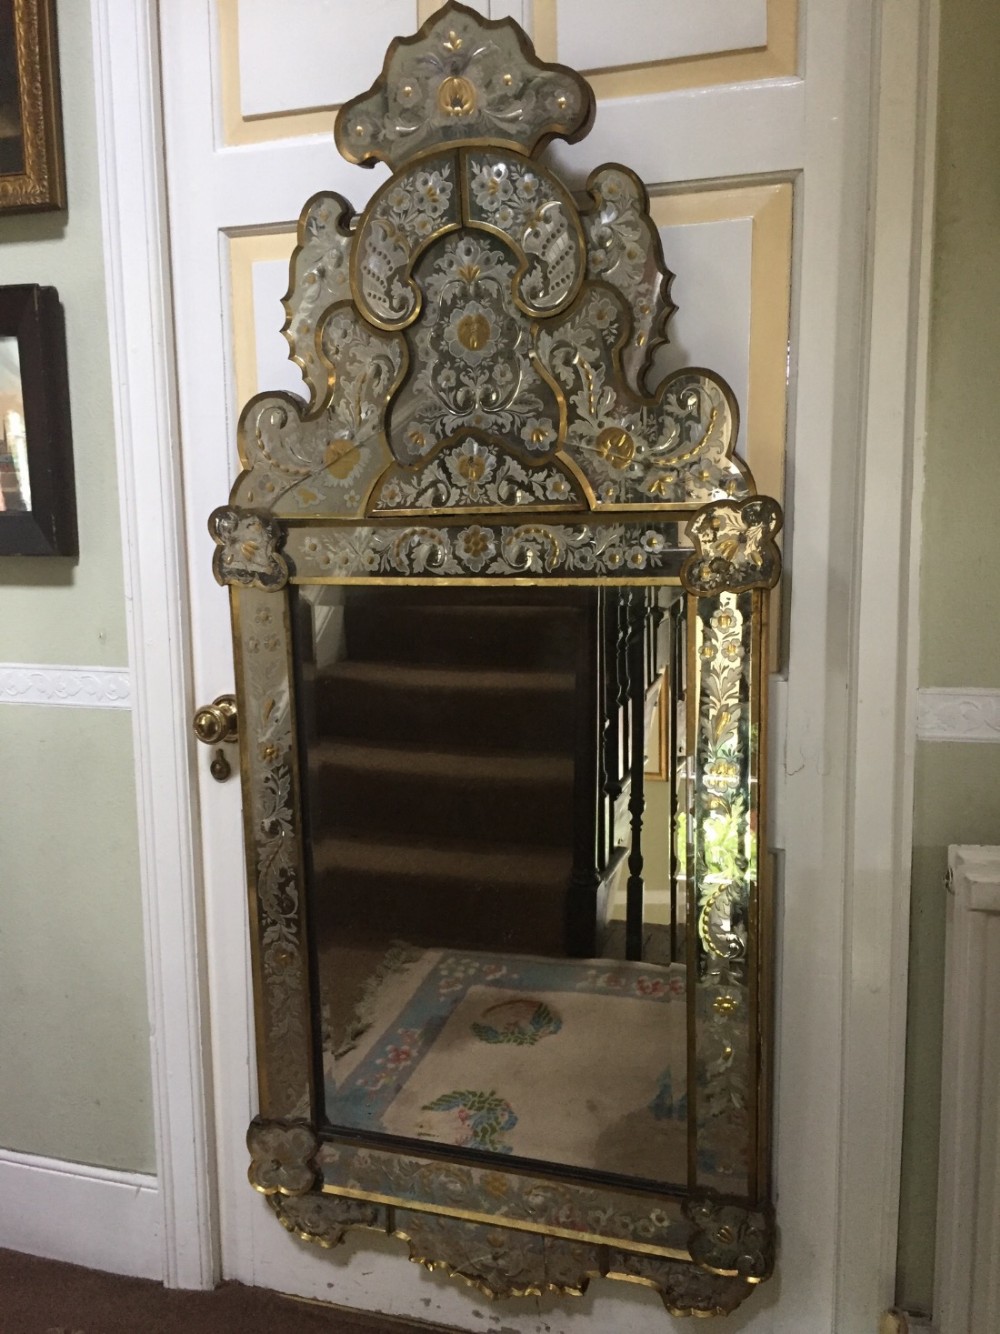 fine and decorative late c19th italian 'verre eglomise' venetian mirror with detailed engraving and gilded highlights and edges